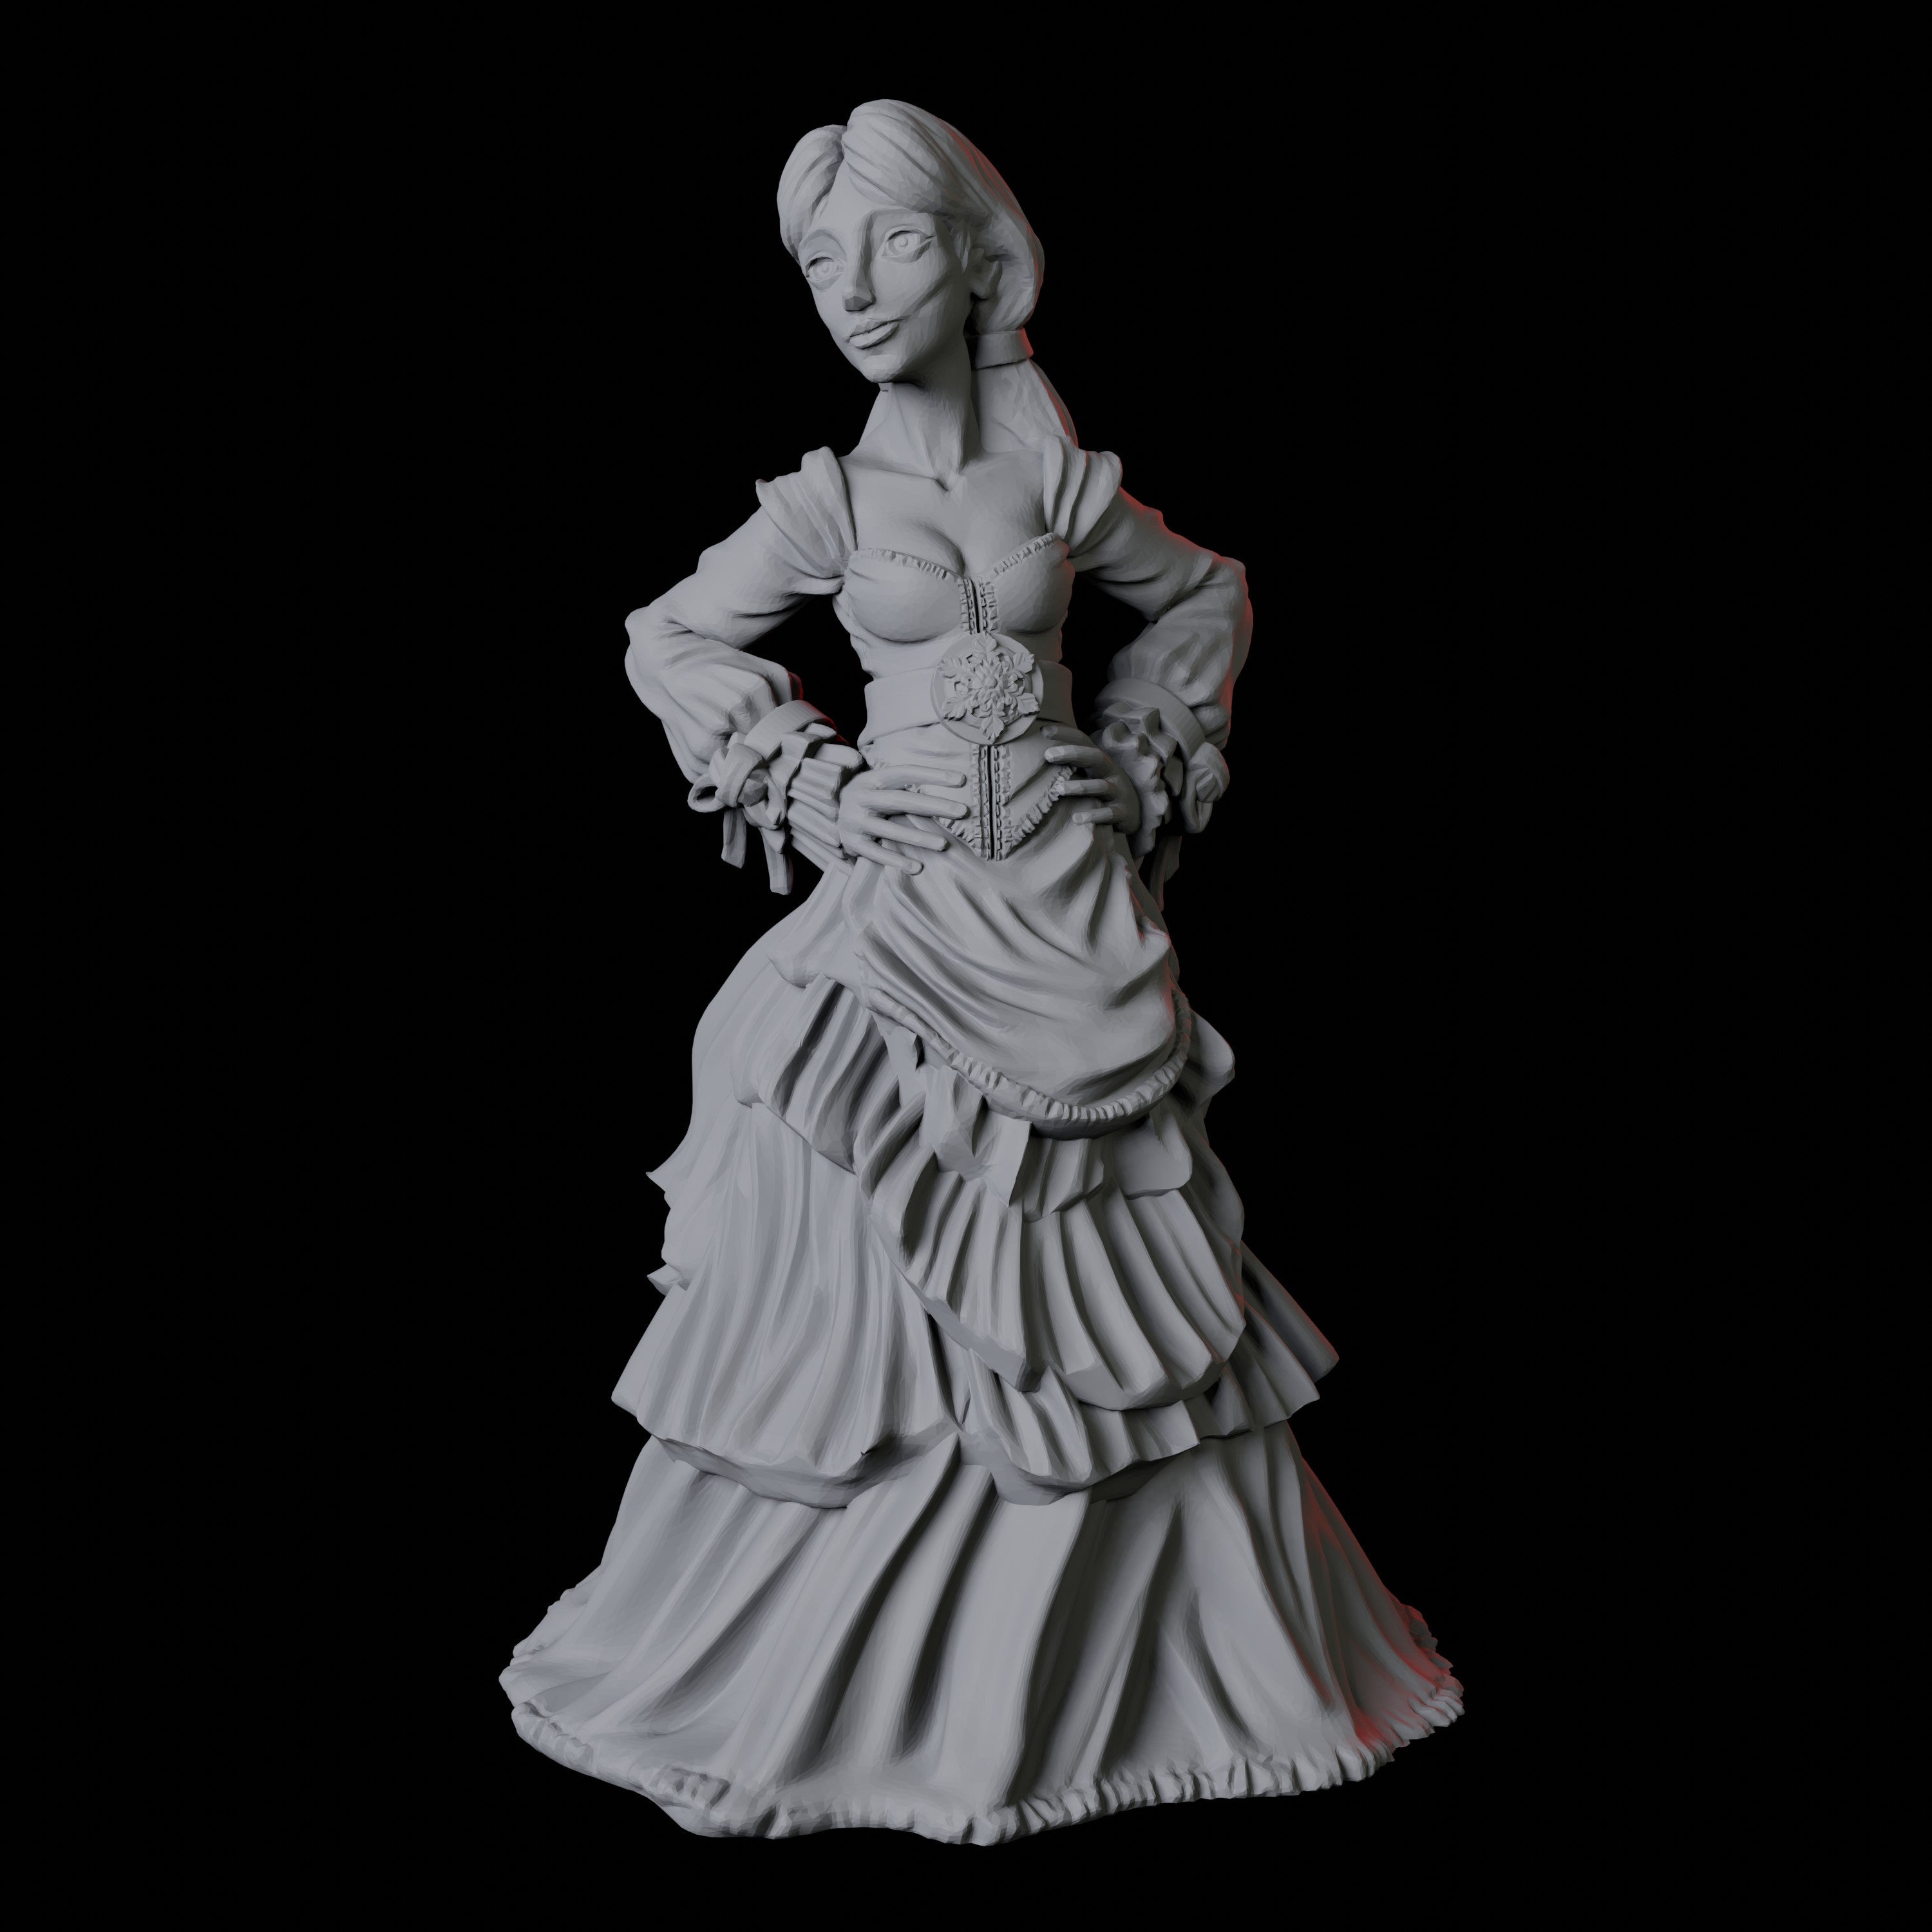 Lords & Ladies - Masquerade Ball Miniature for Dungeons and Dragons